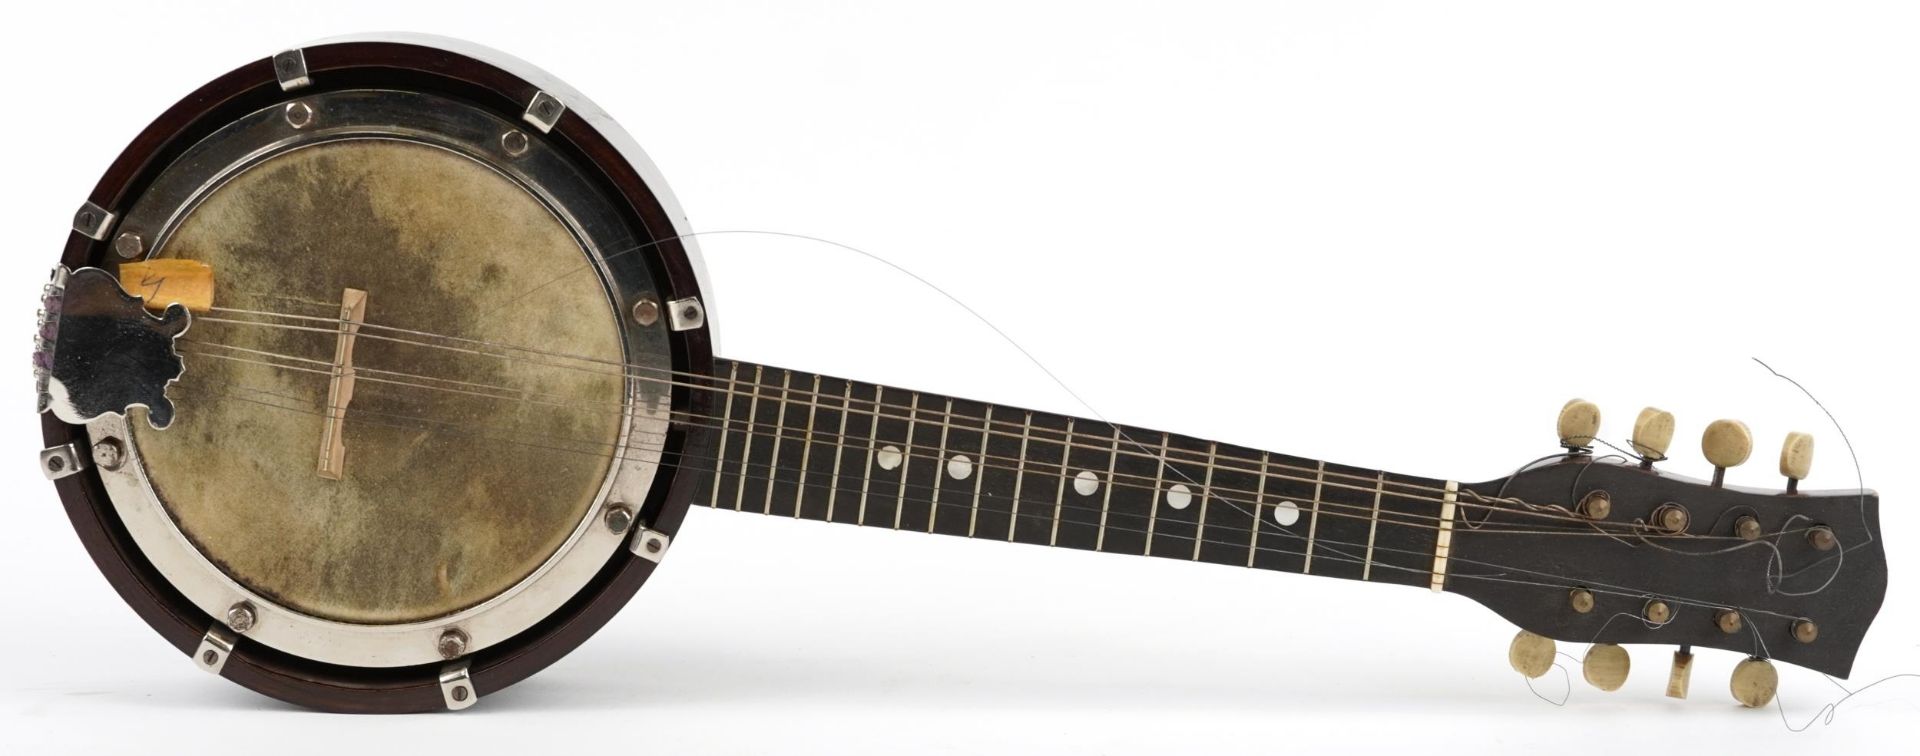 Early 20th century eight string banjo ukulele with fitted case, 54cm in length : For further